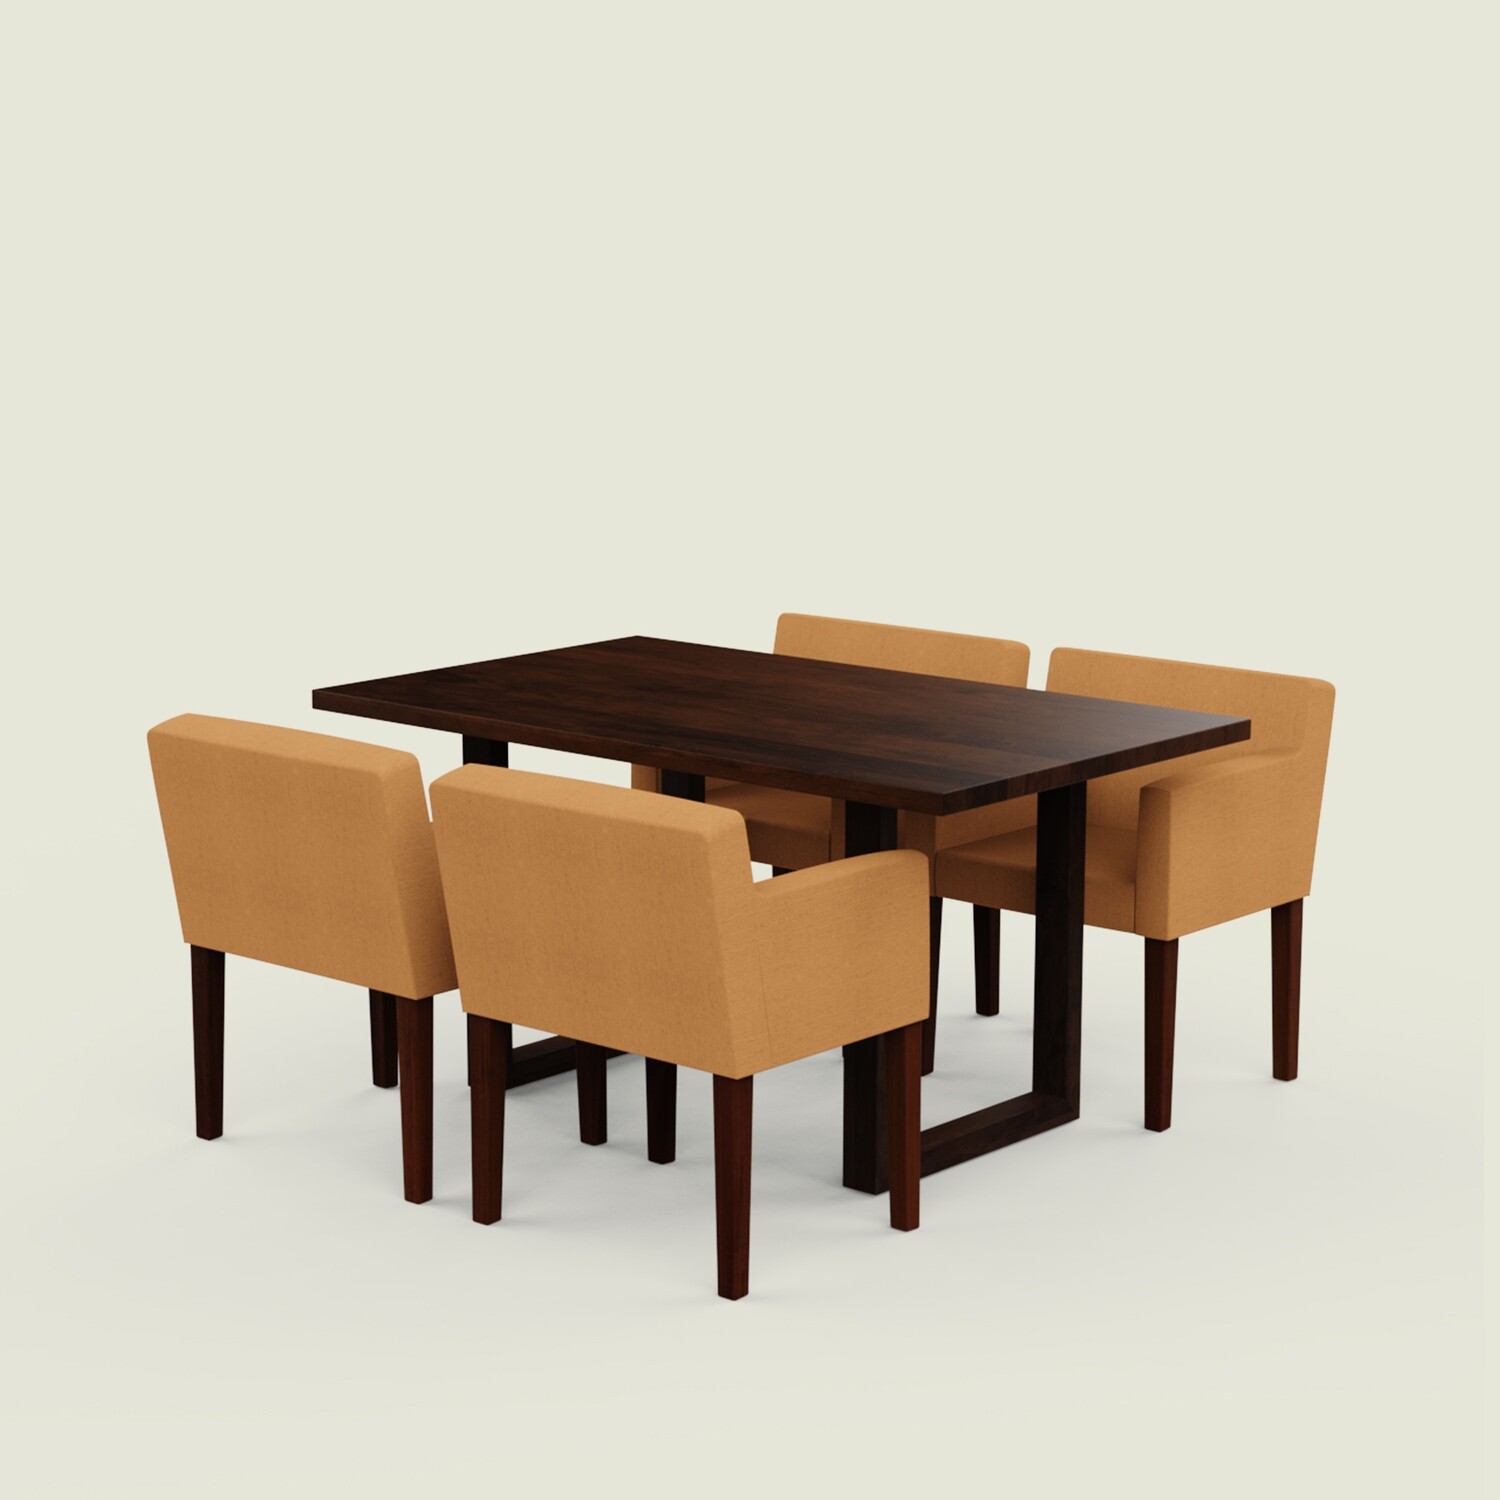 Plaza Luxury Dining Table Set - 4, 6 & 8 Seater/All Sizes